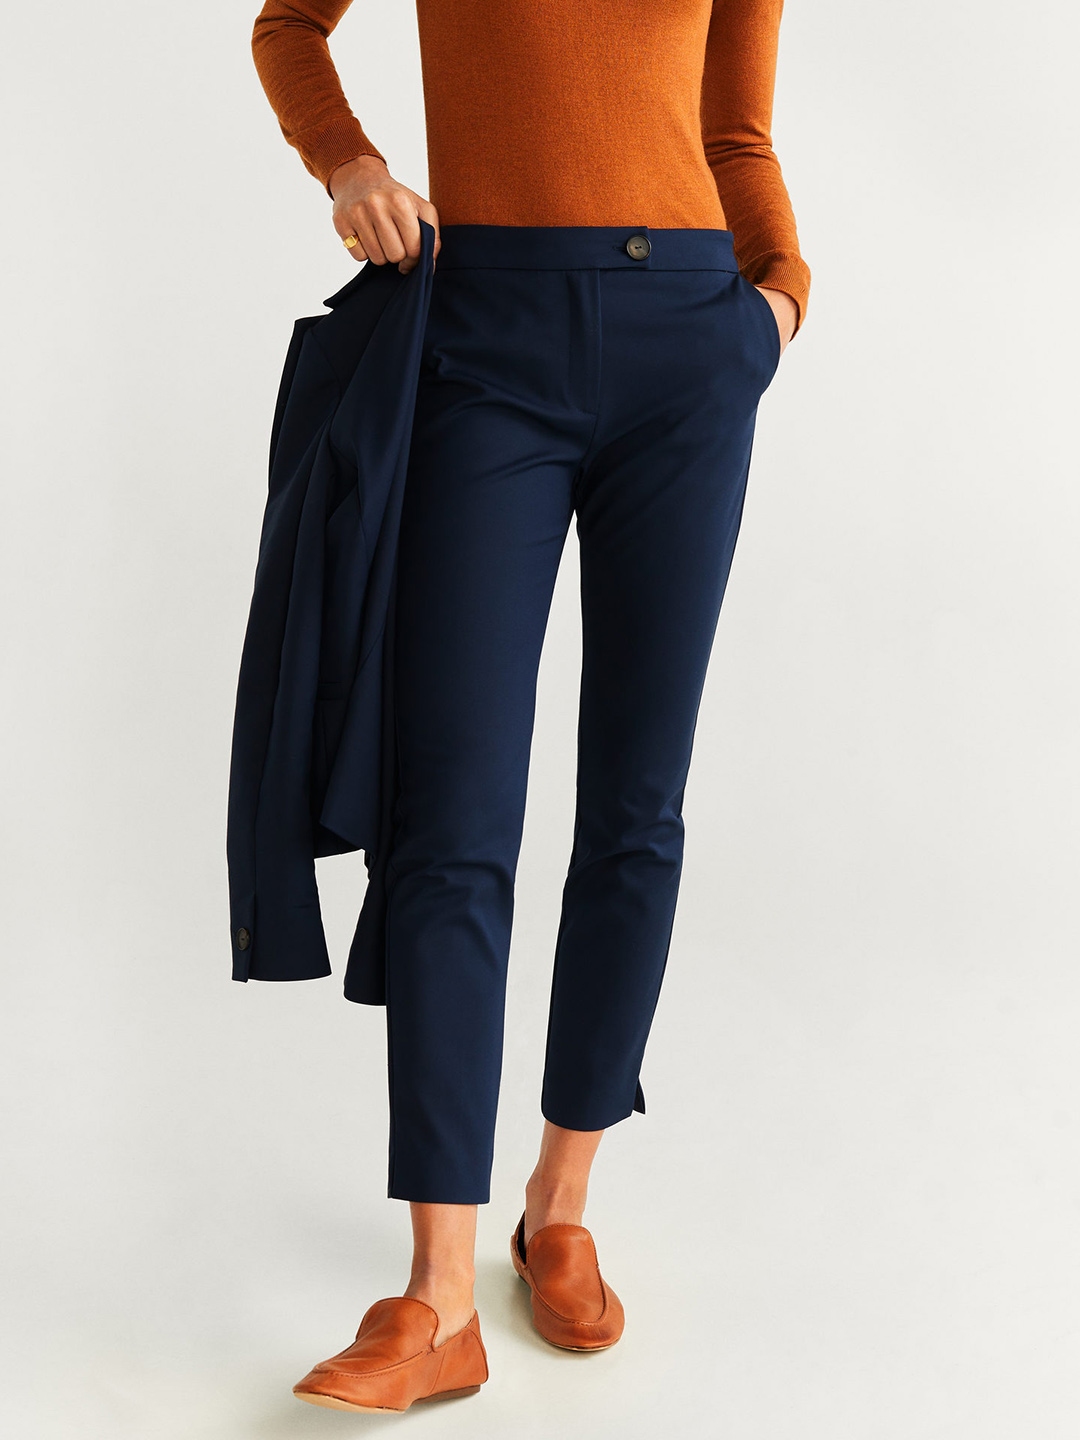 Buy Women Grey  Black Regular Fit Checked Cropped Smart Casual Trousers  online  Looksgudin